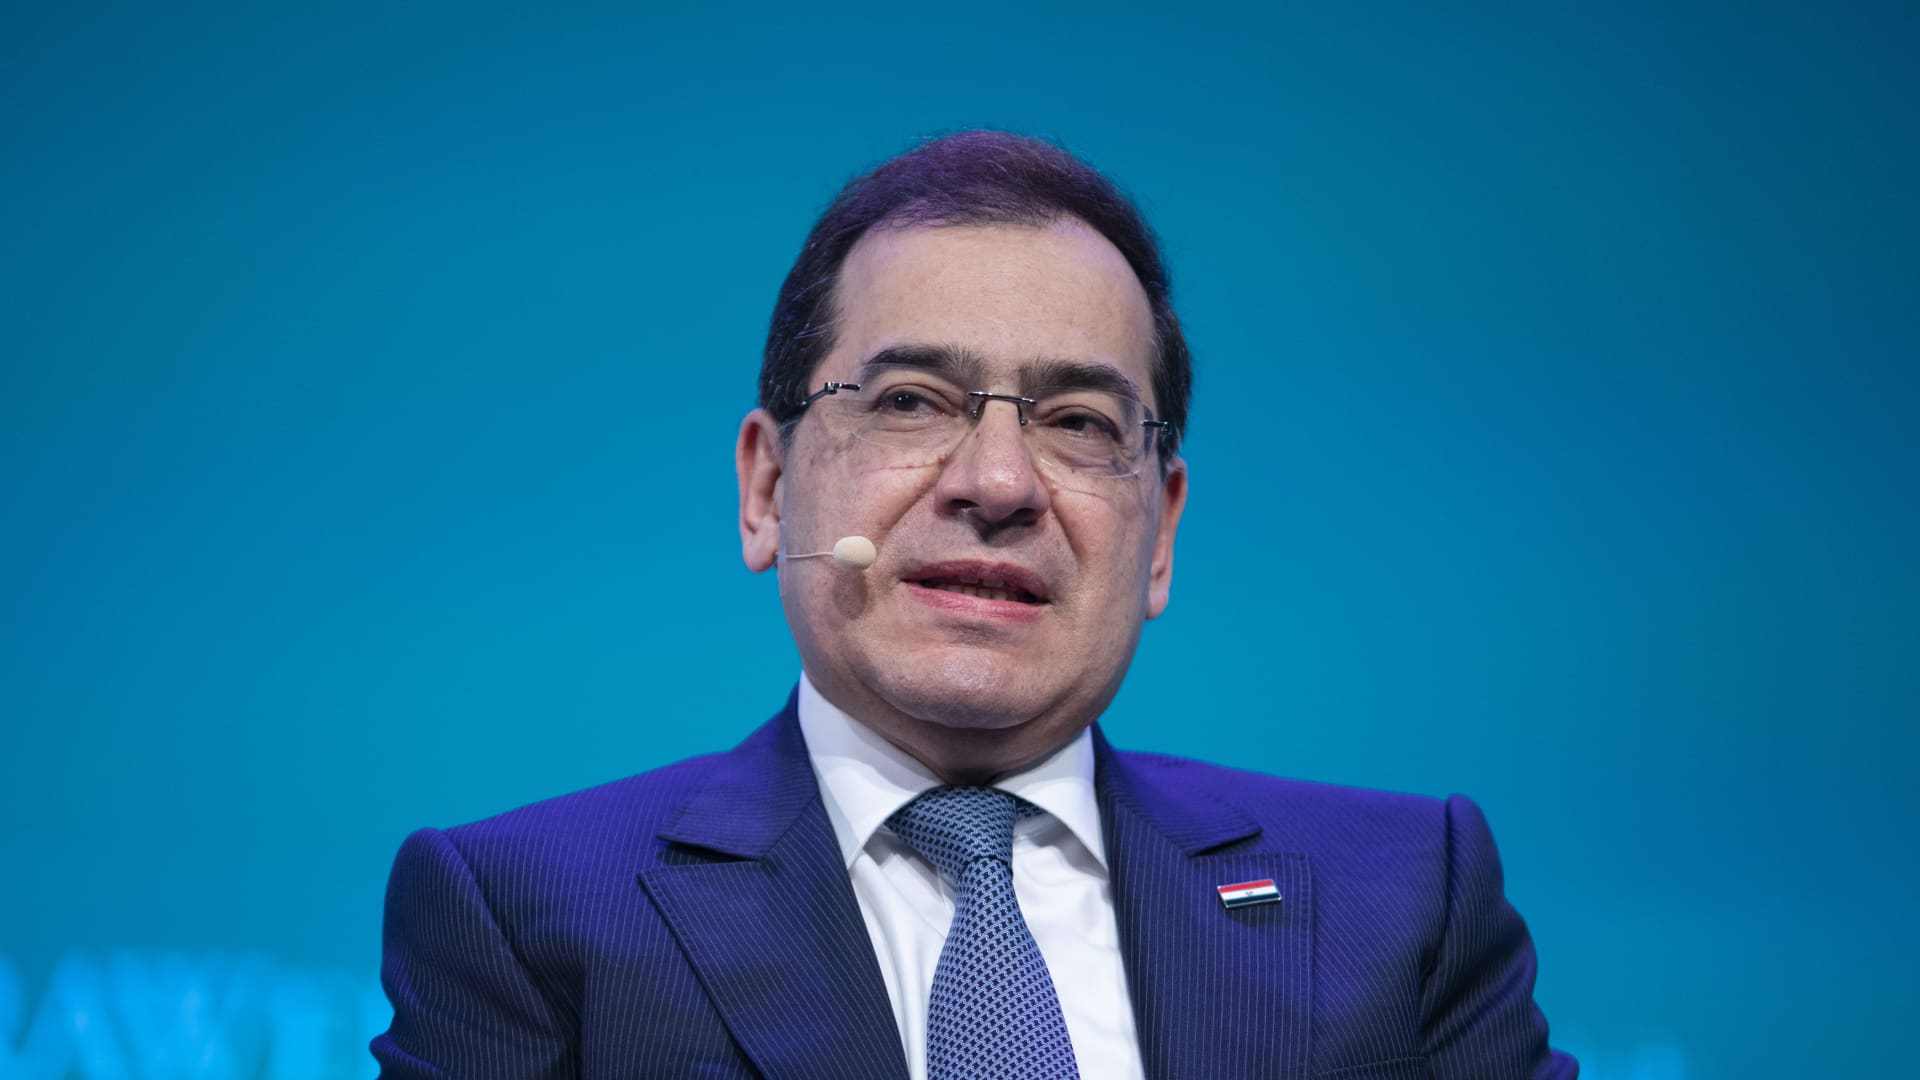 Tarek El-Molla, Egypt's oil minister, speaks during the 2019 CERAWeek by IHS Markit conference in Houston, Texas, U.S., on Wednesday, March 13, 2019.